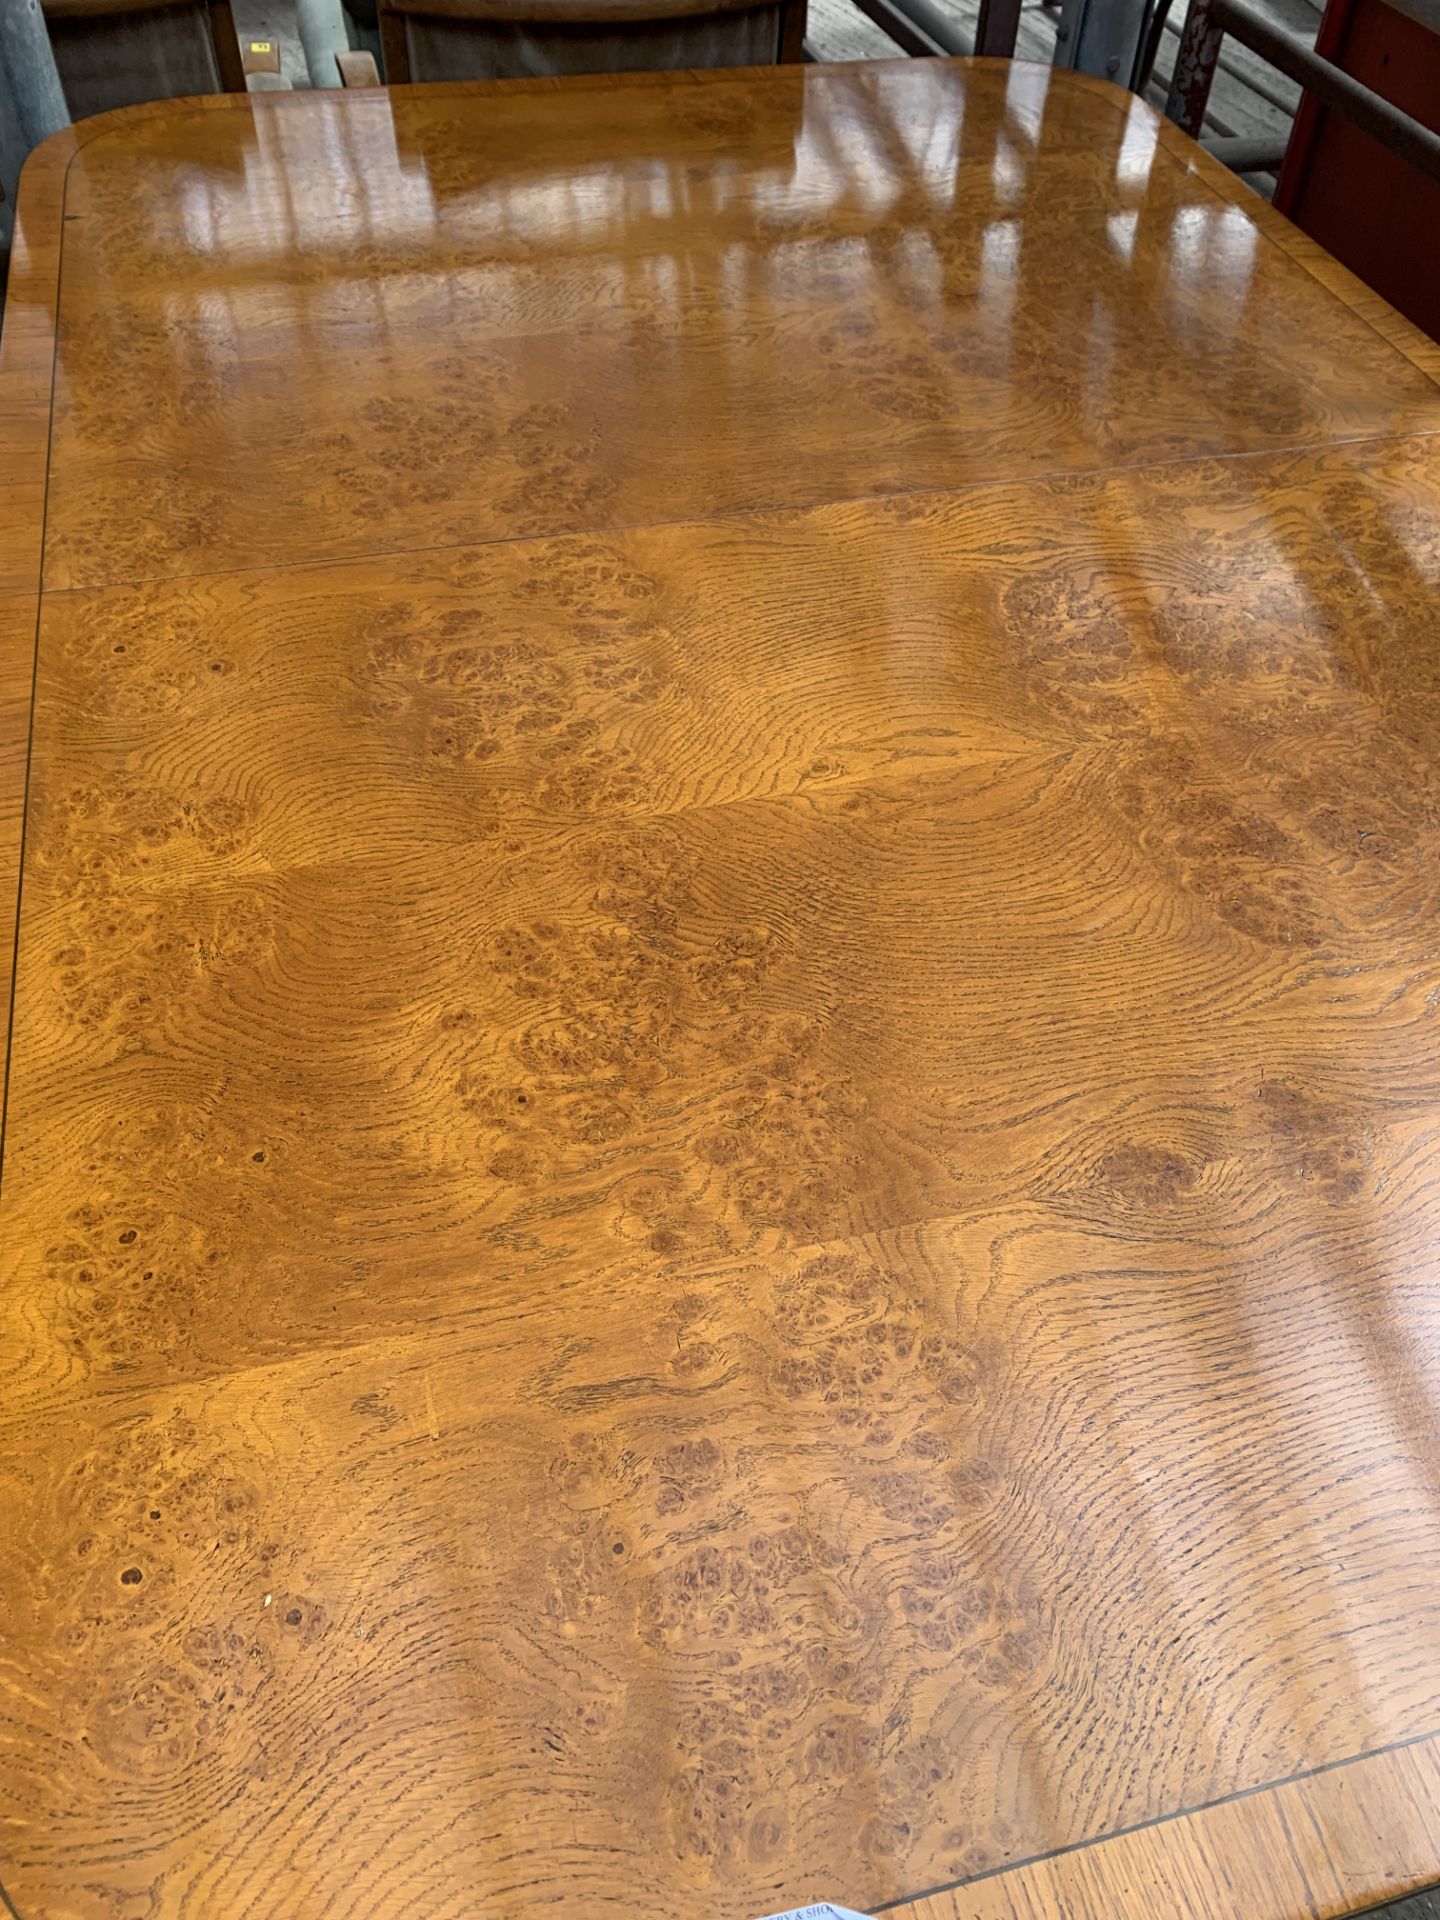 Walnut veneer extendable dining table by Brights of Nettlebed - Image 3 of 4